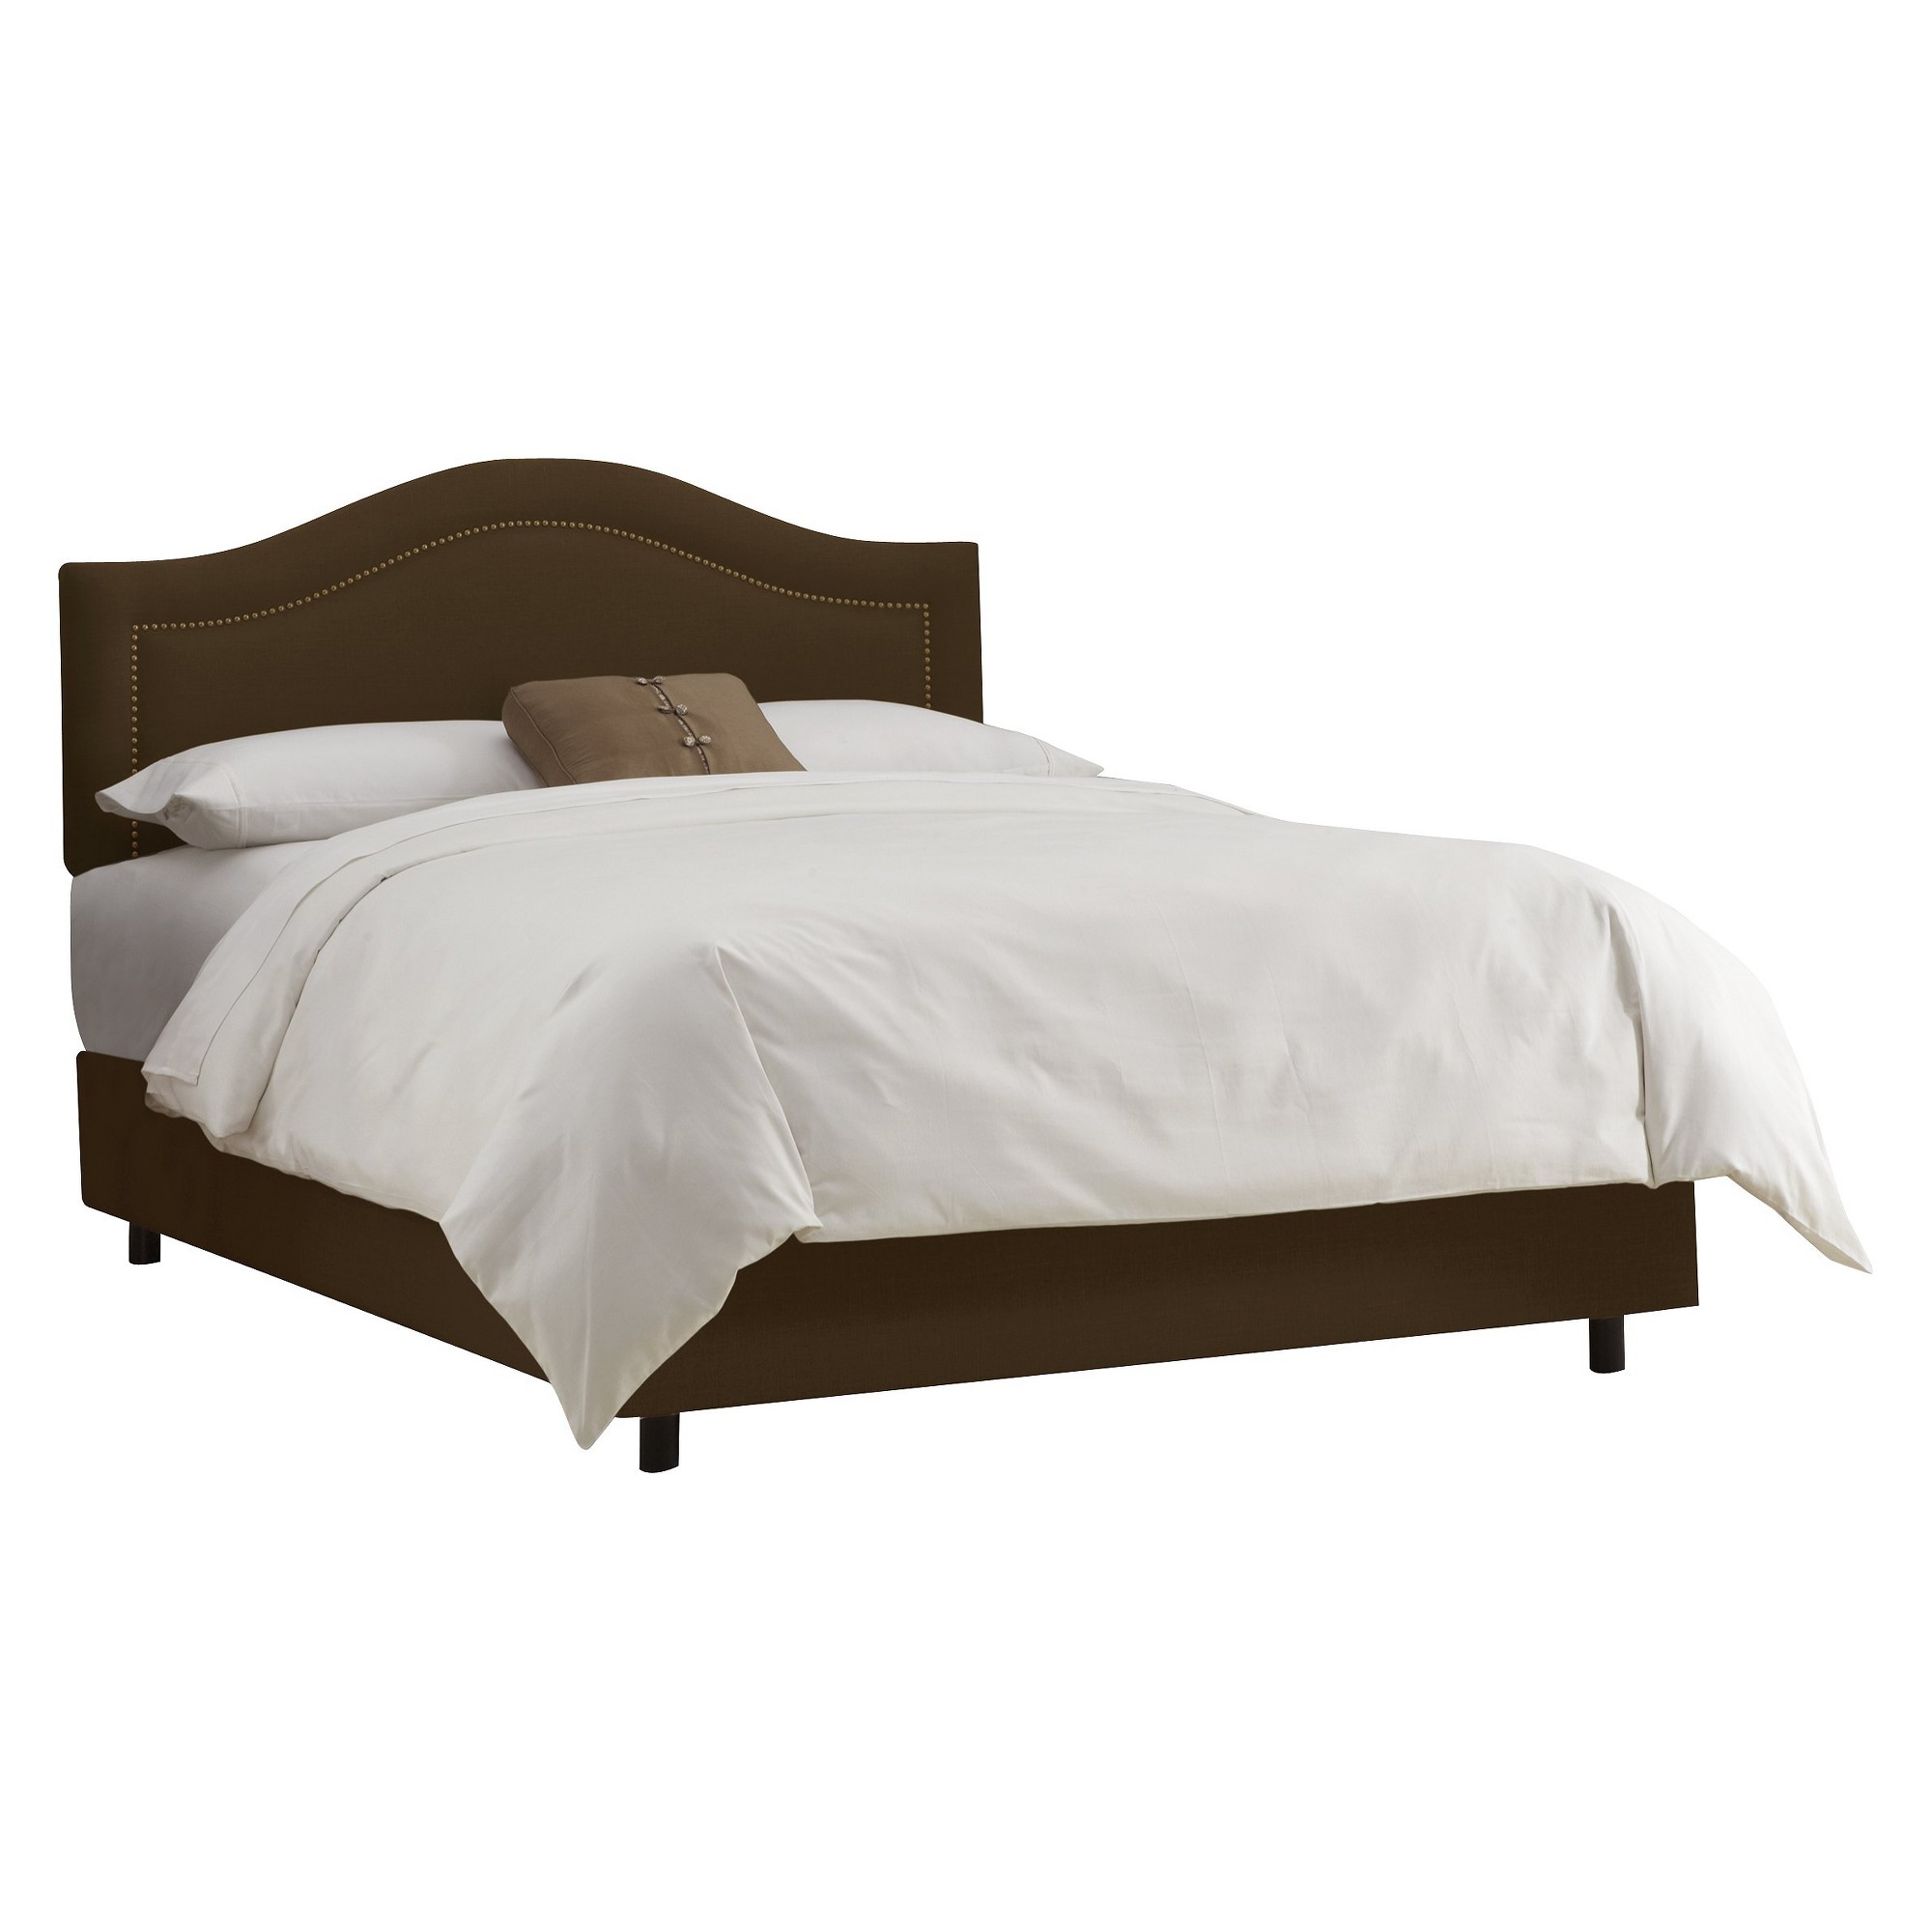 Skyline Furniture Merion Inset Nailbutton Bed - Chocolate (Cal King) - Skyline Furniture , Size: California King, Brown